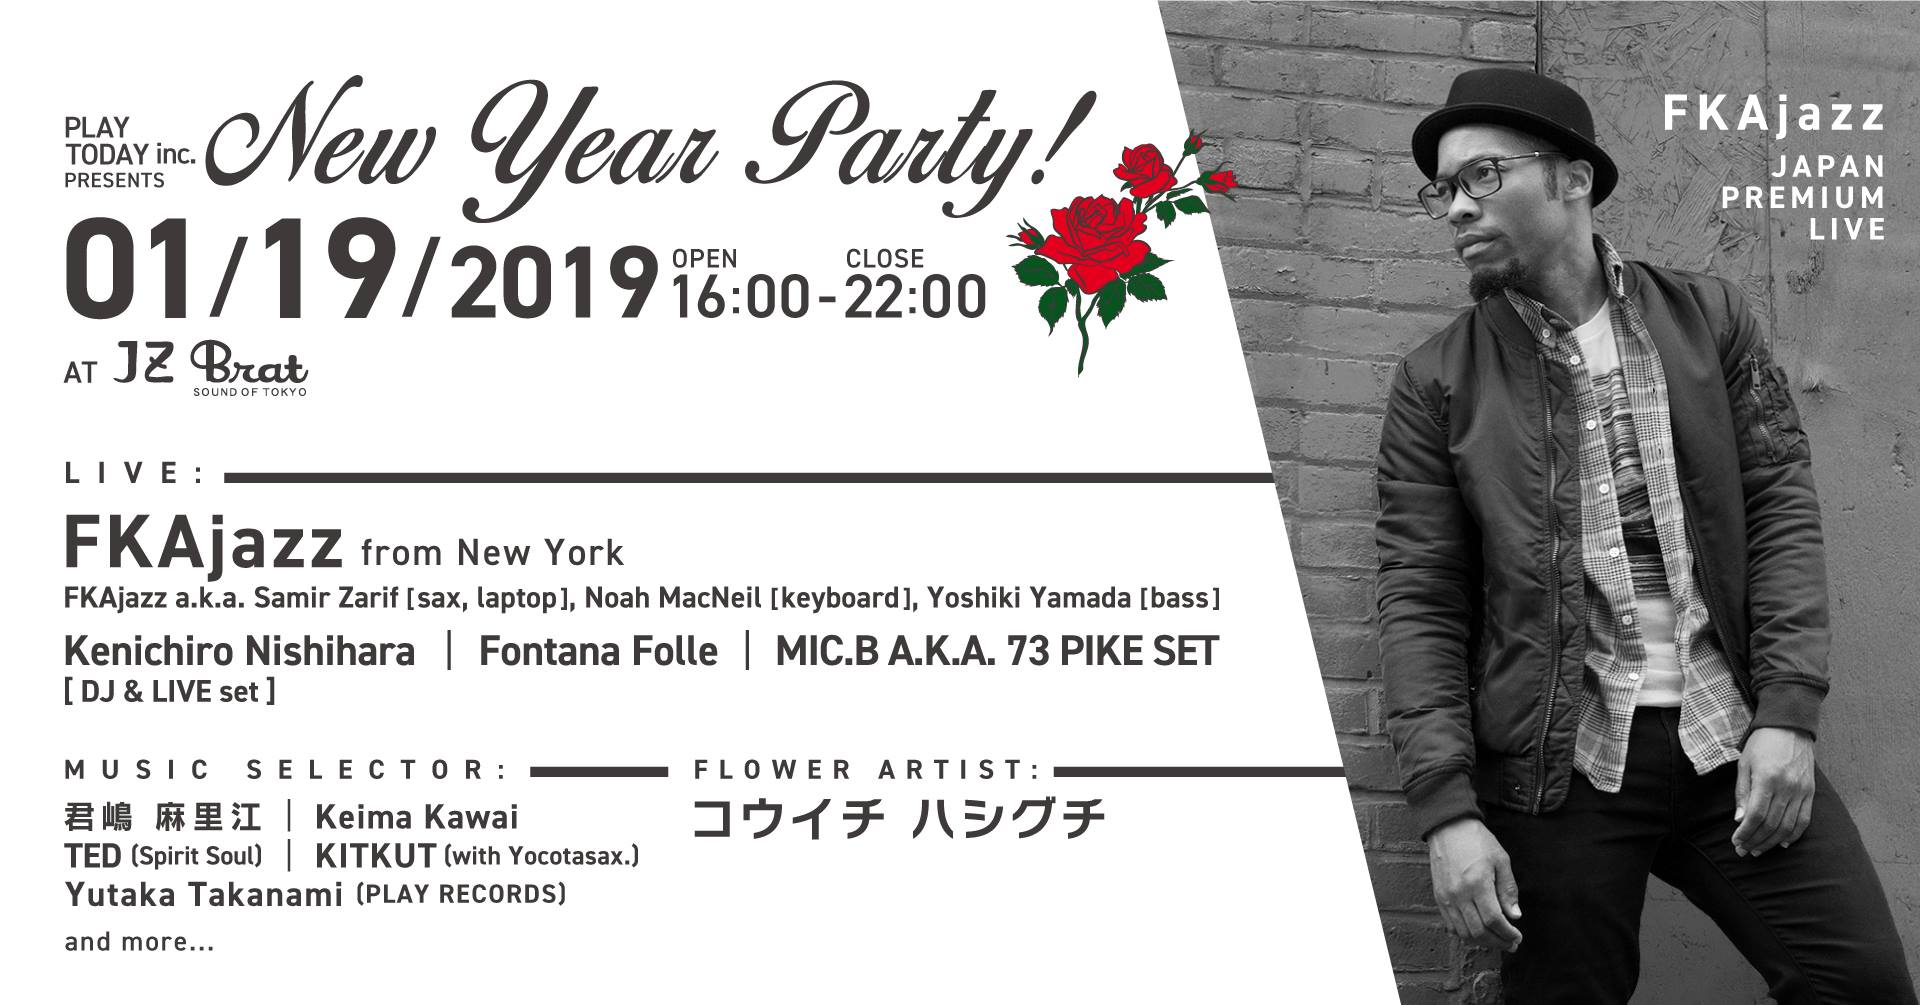 2019/1/19(sat) PLAY TODAY presents New Year party! “FKAjazz” Japan Premium Live